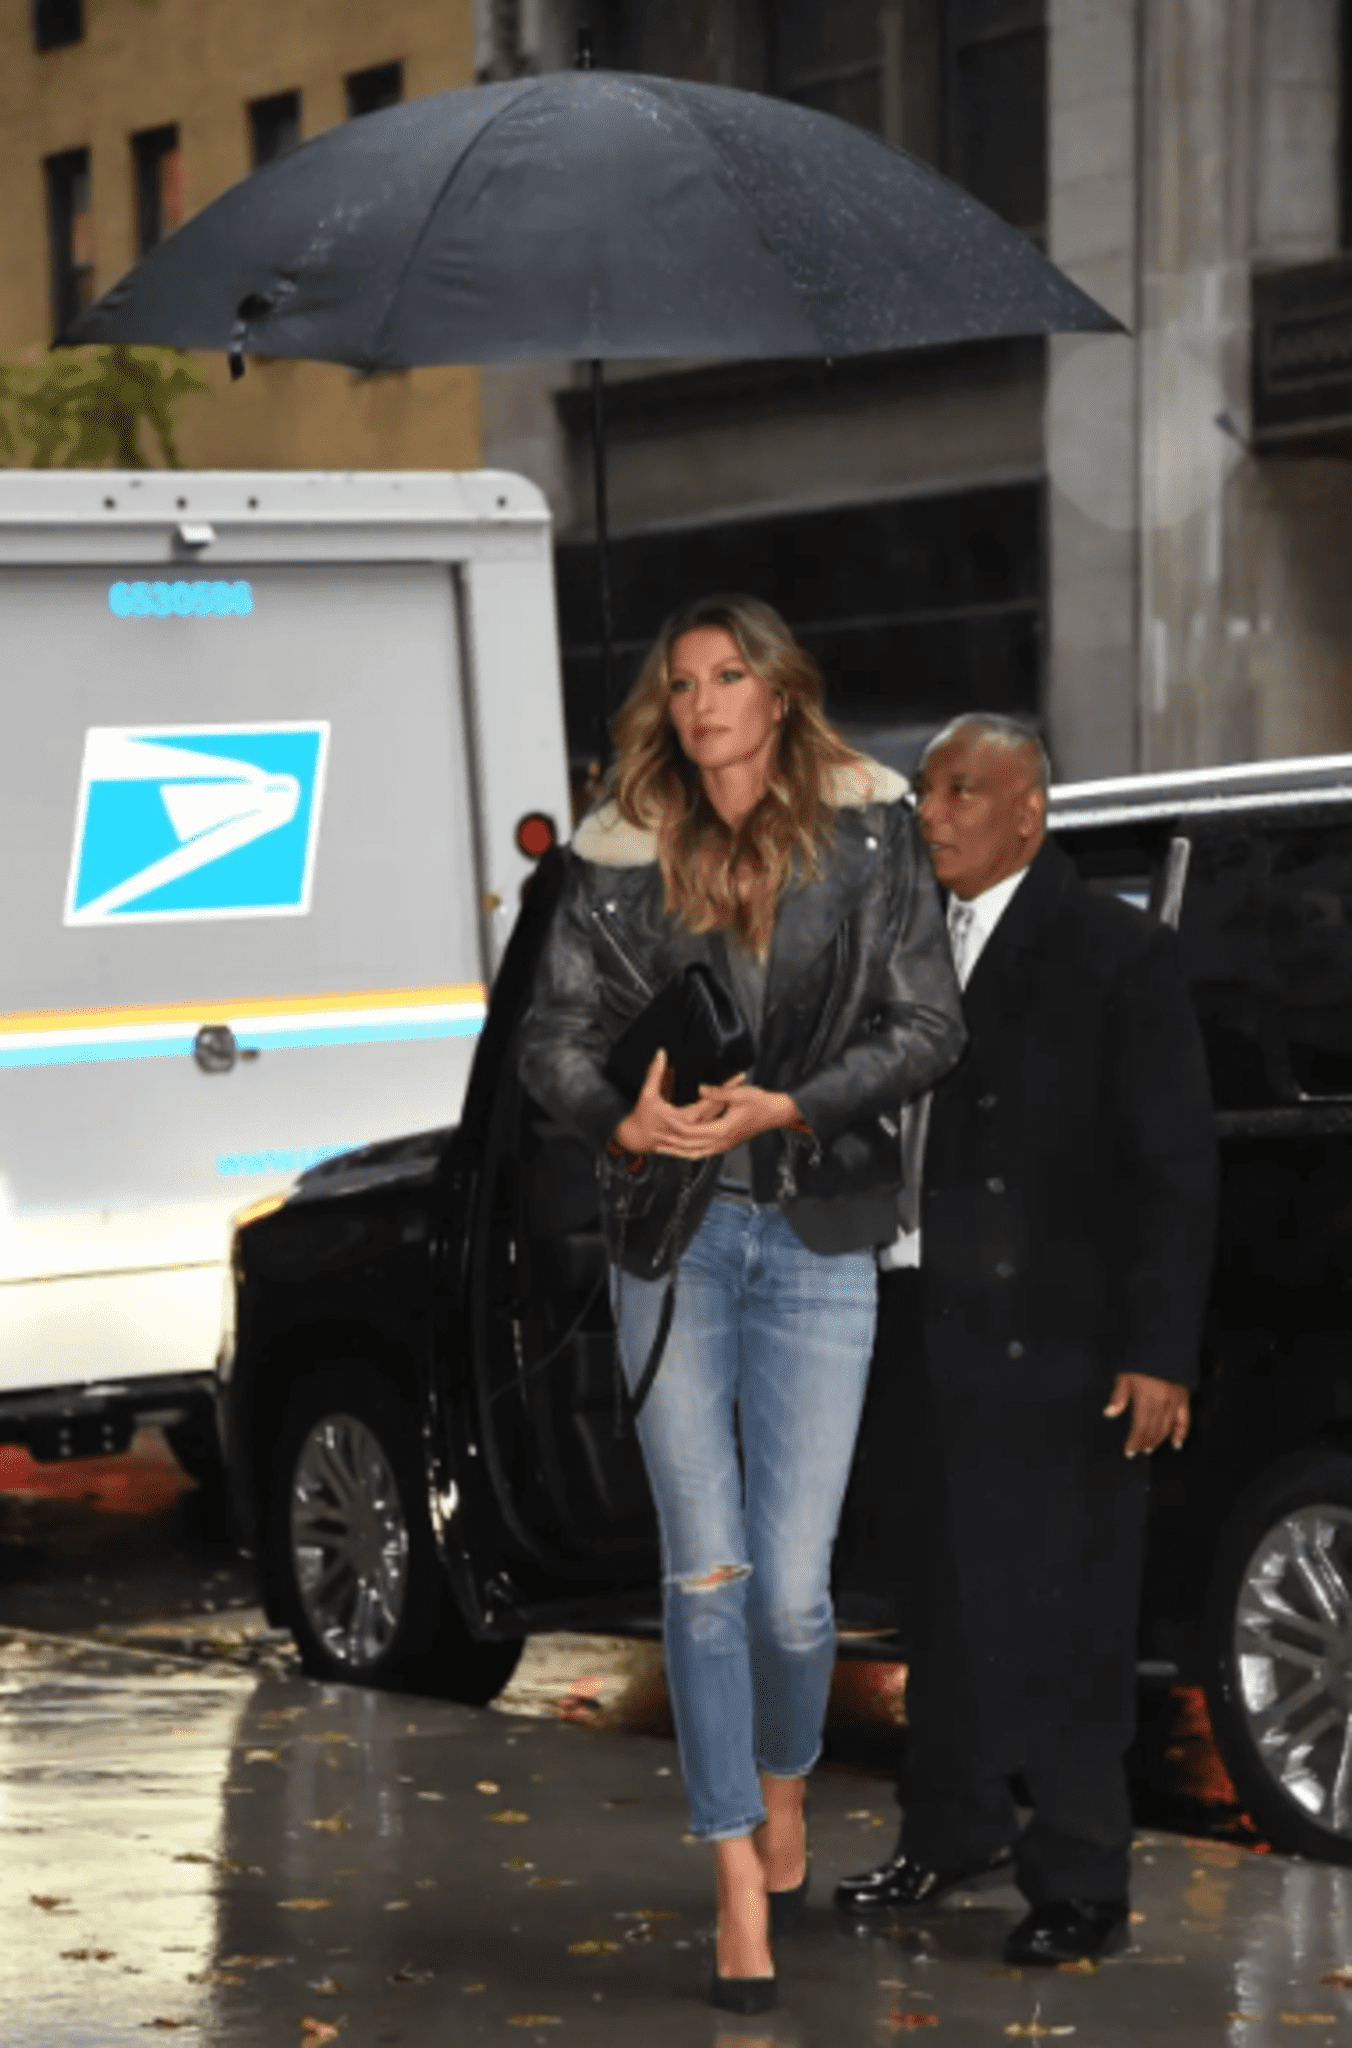 After meeting with numerous divorce lawyers in Miami, Gisele Bünchen was spotted exiting one of the offices.